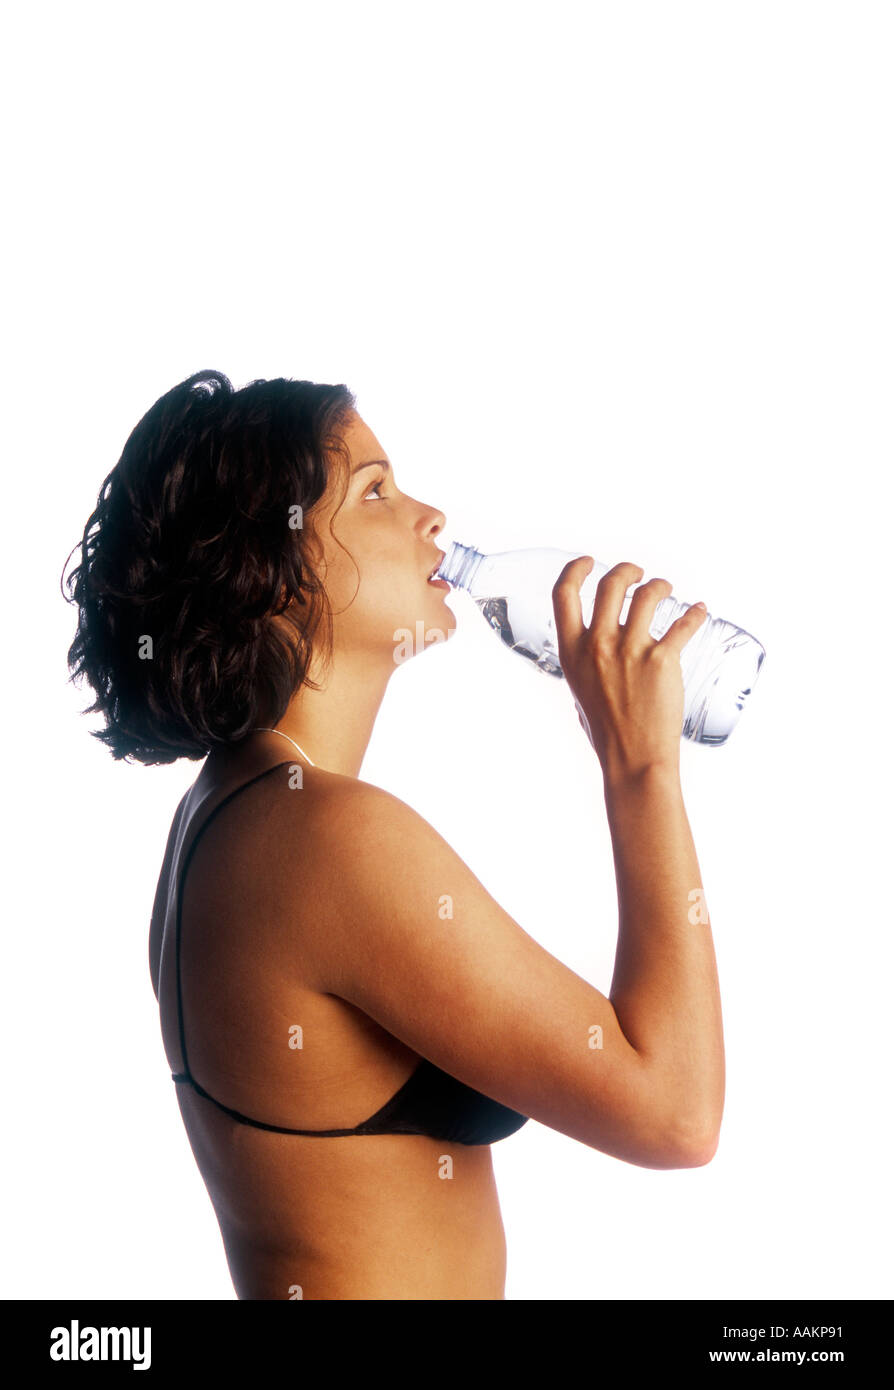 image of woman in bikini top holiding a water bottle Stock Photo